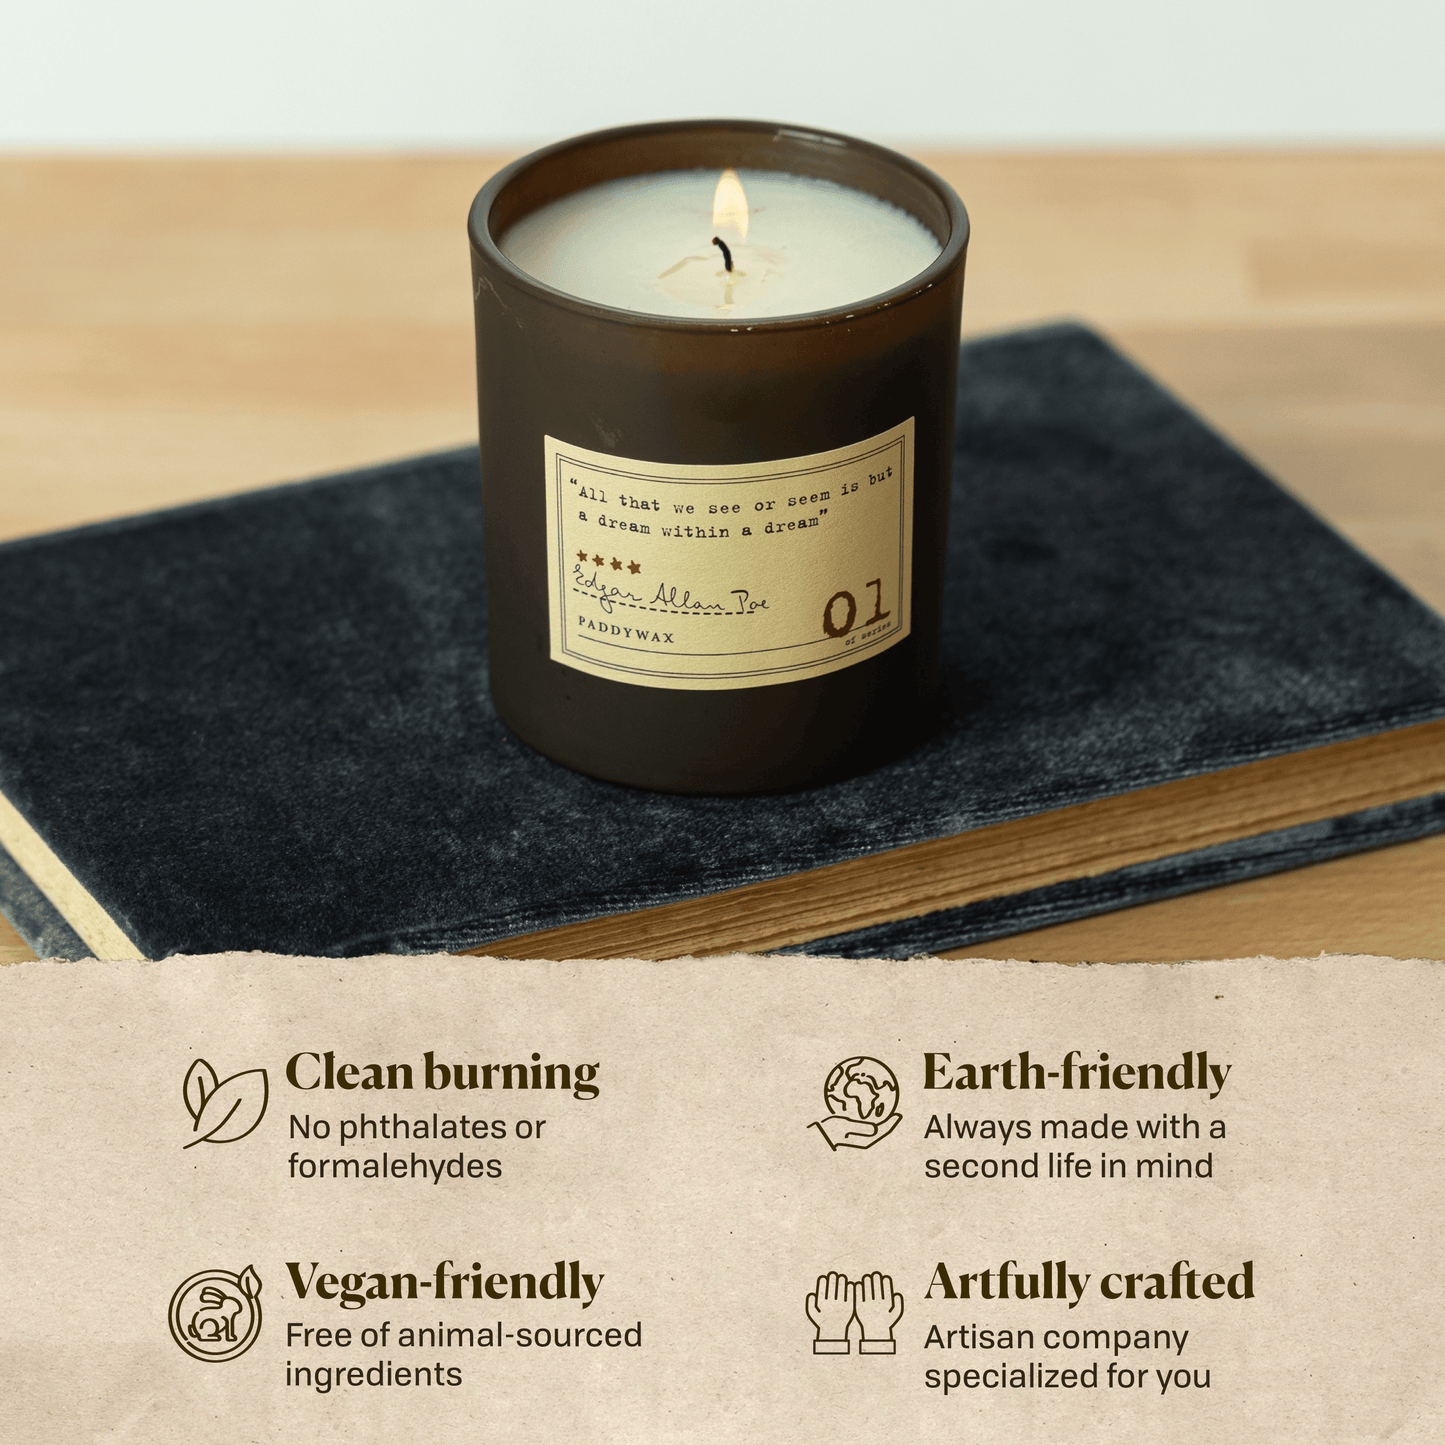 A photo of the Edgar Allan Poe candle sitting on a book. Clean burning: no phthalates or formaldehydes. Earth-friendly: Always made with a second life in mind. Vegan-friendly: Free of animal sourced ingredients. Artfully crafted: Artisan company specialized for you.